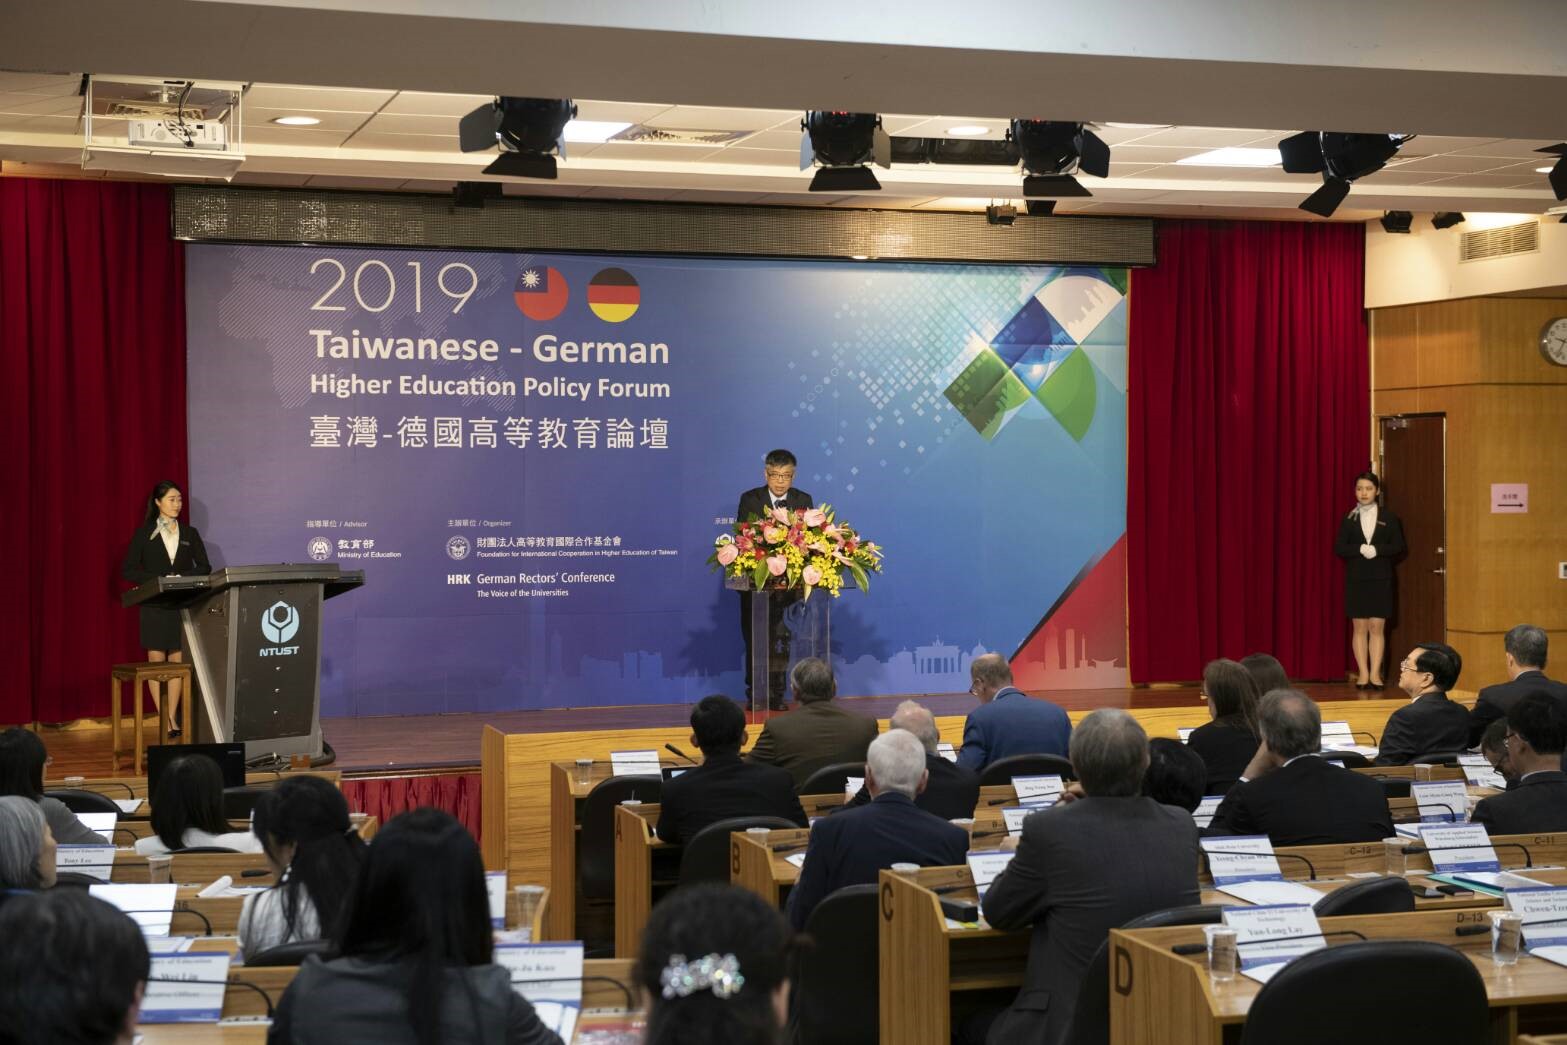 Taiwanese–German Higher Education Policy Forum  to Facilitate Scientific and Research Dialogue and Cooperation